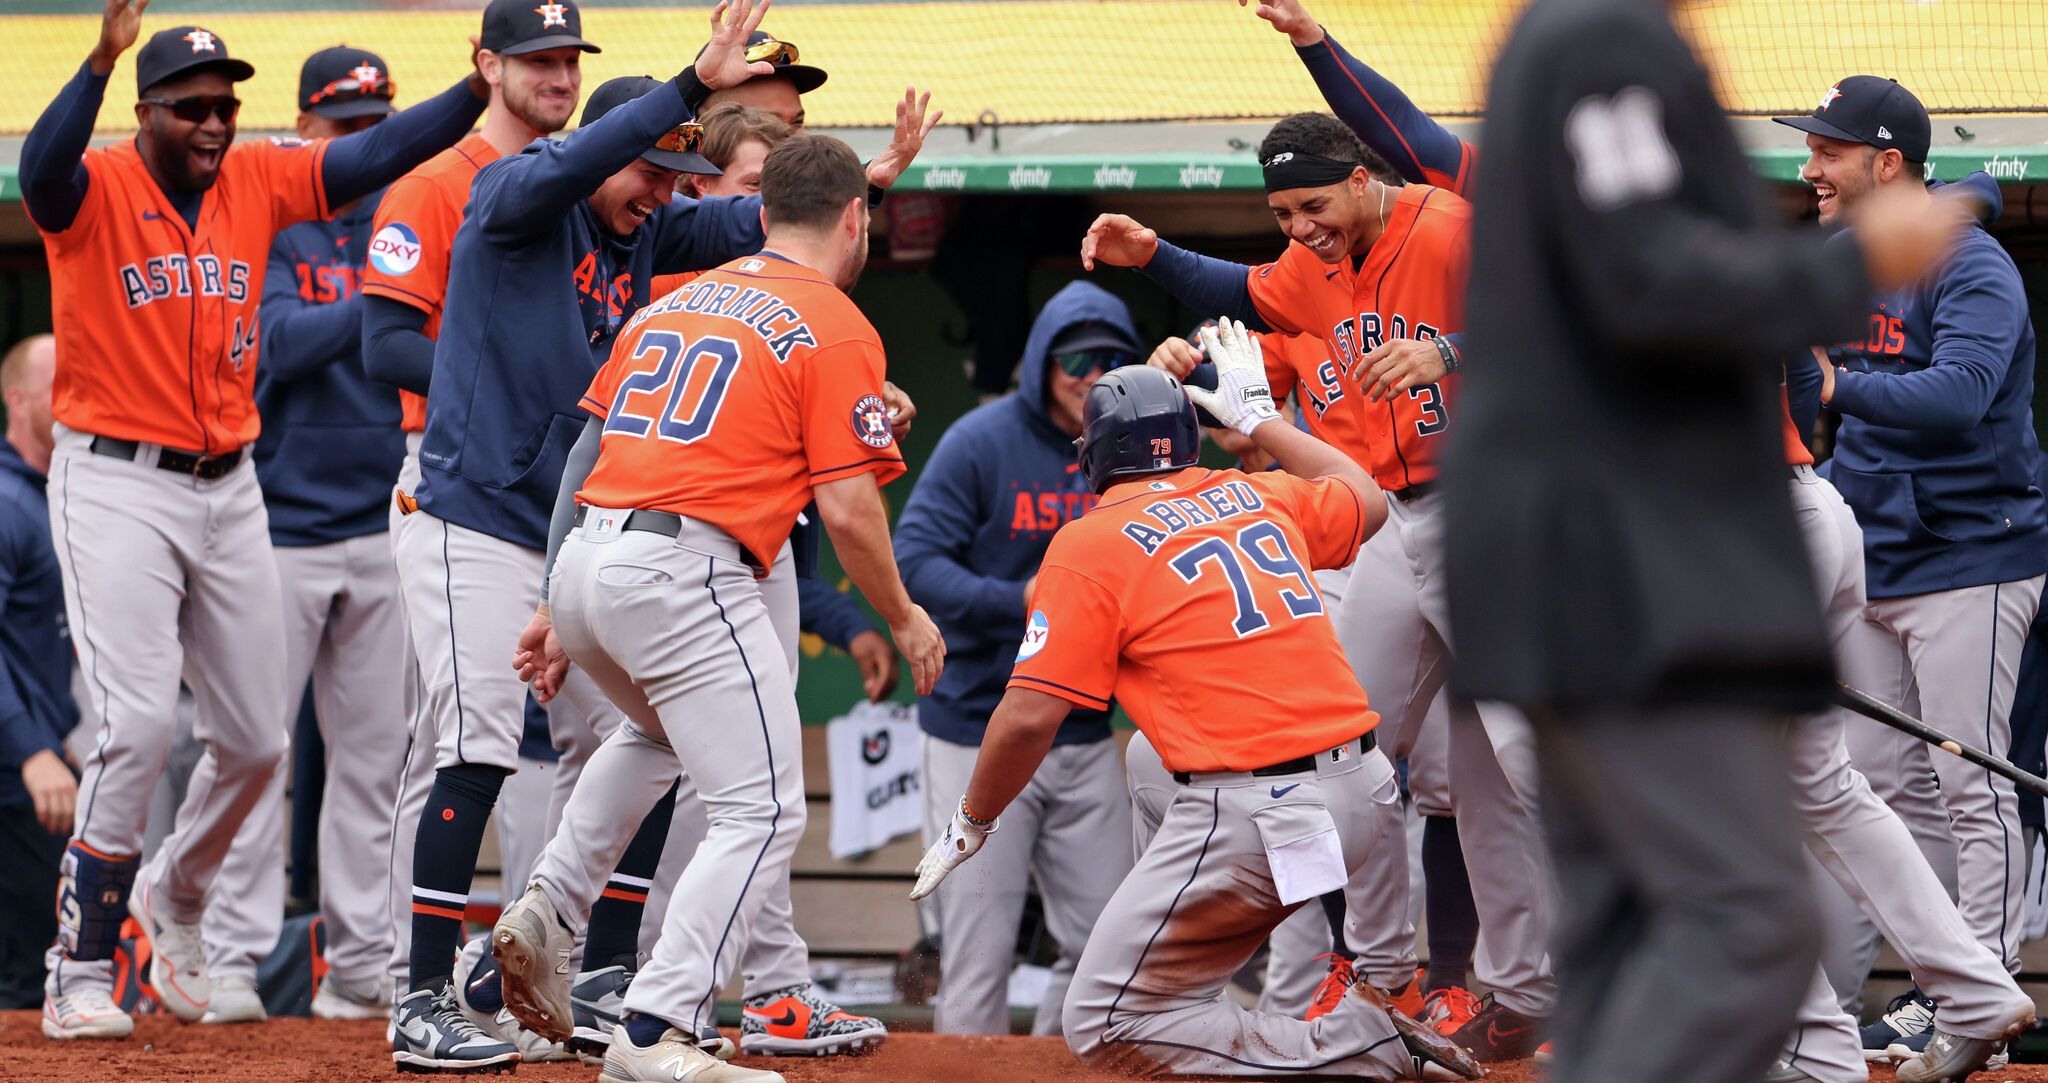 Astros manager Dusty Baker likes seeing his players happy, celebrating